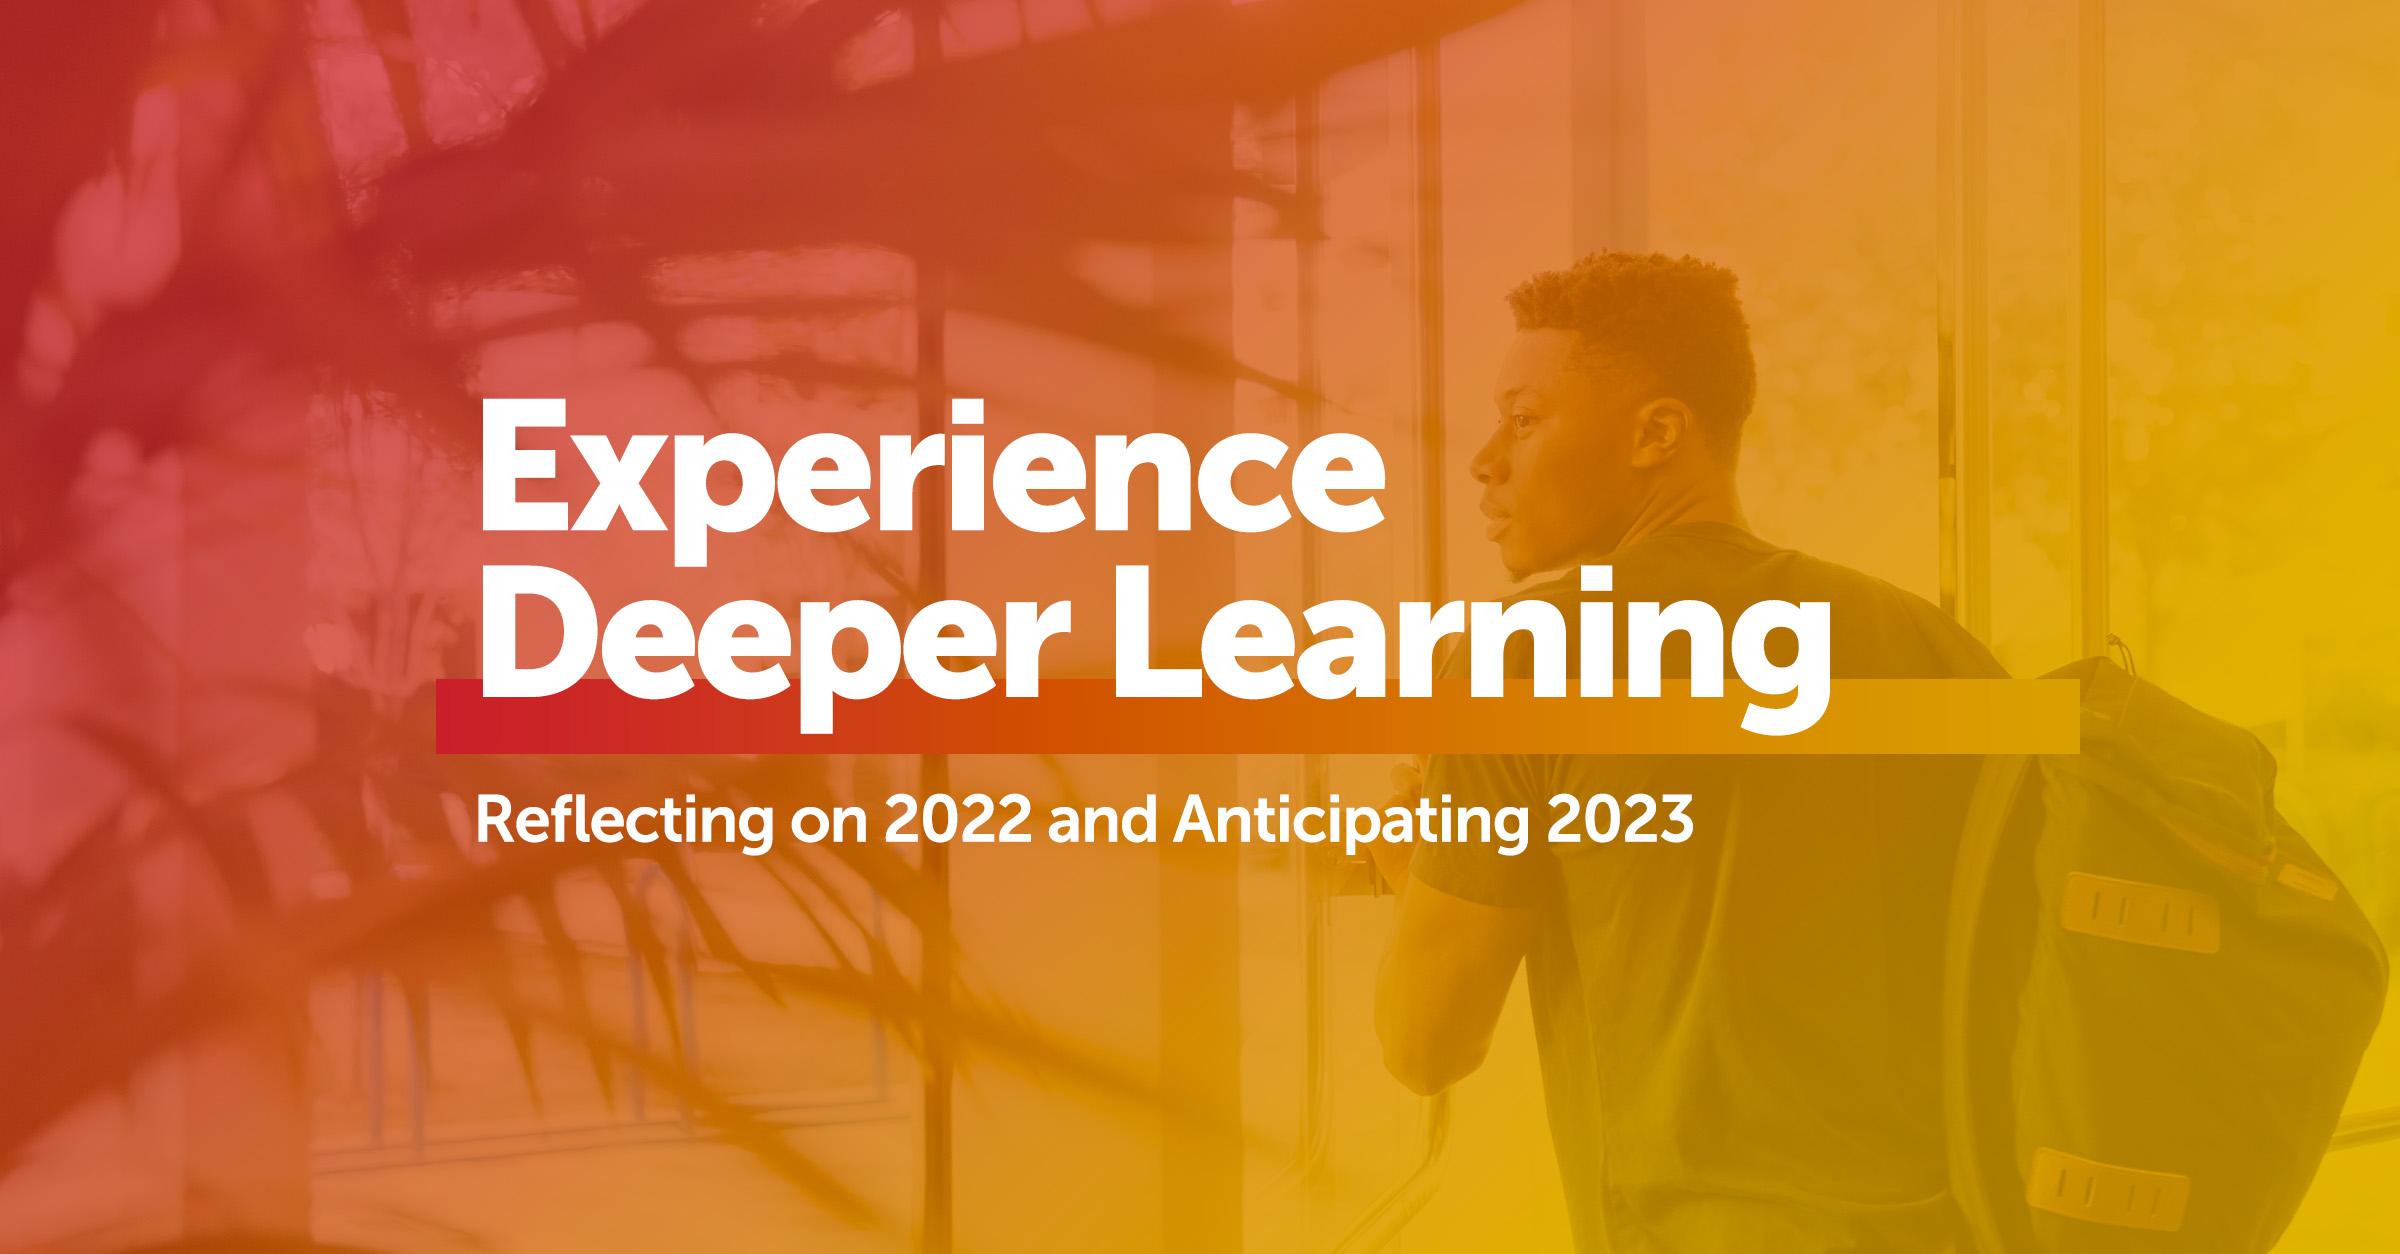 Experience Deeper Learning Reflecting on 2022 and Anticipating 2023